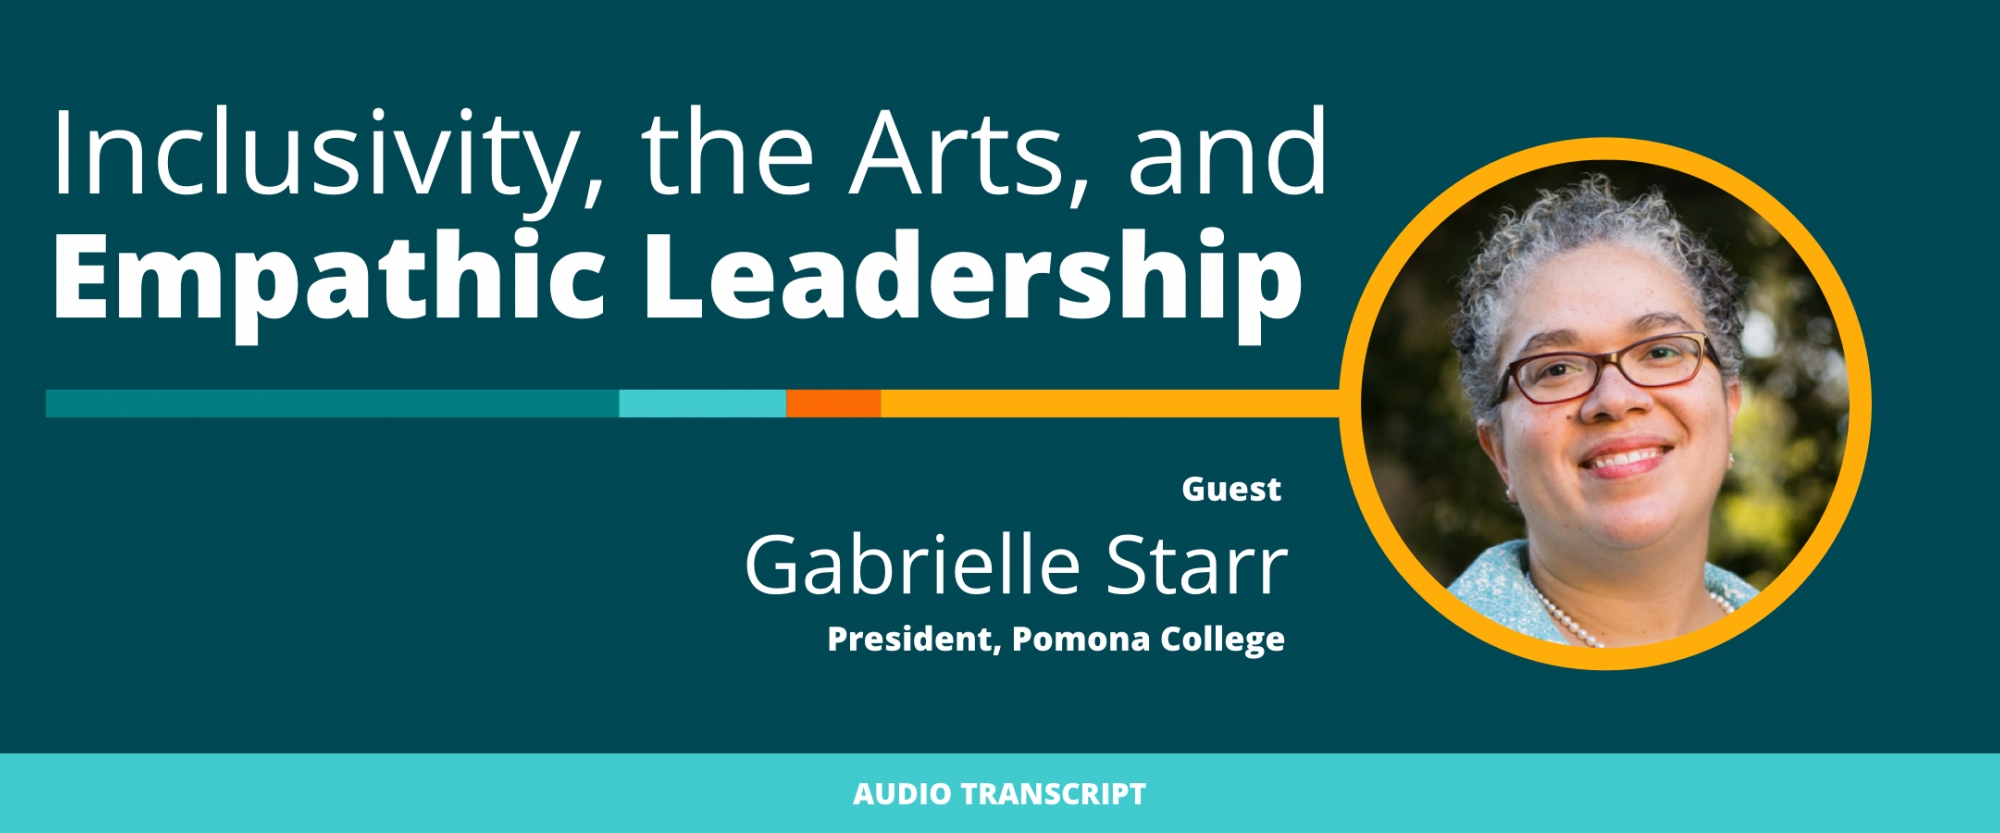 Weekly Wisdom 3/29/21: Transcript of Conversation With Gabrielle Starr, Pomona College President